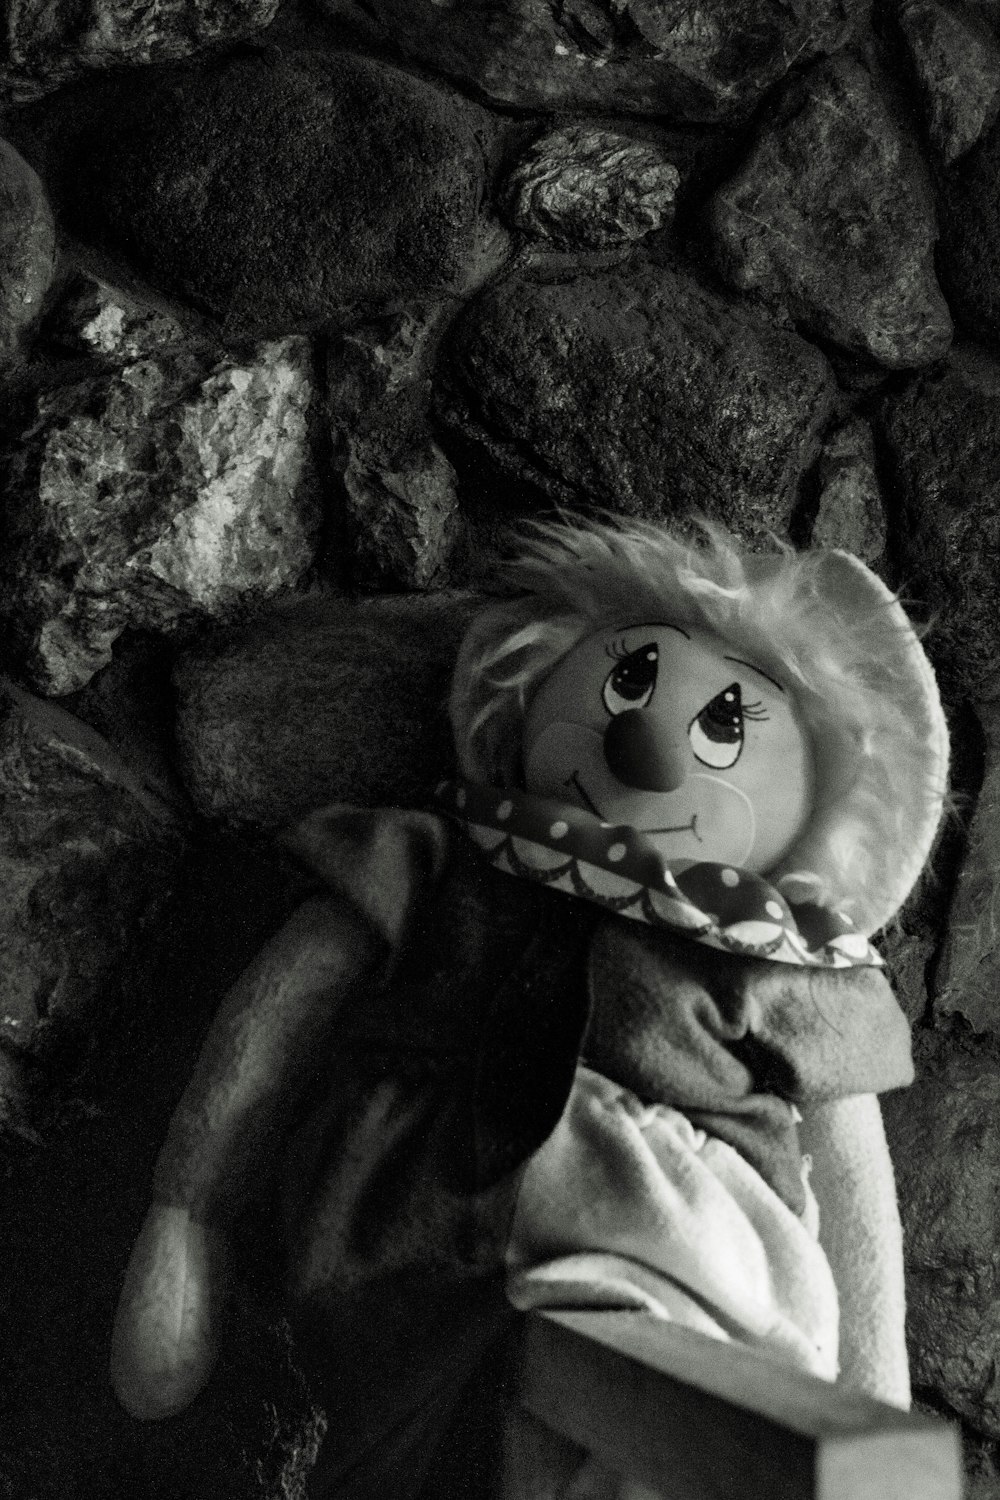 a black and white photo of a stuffed animal